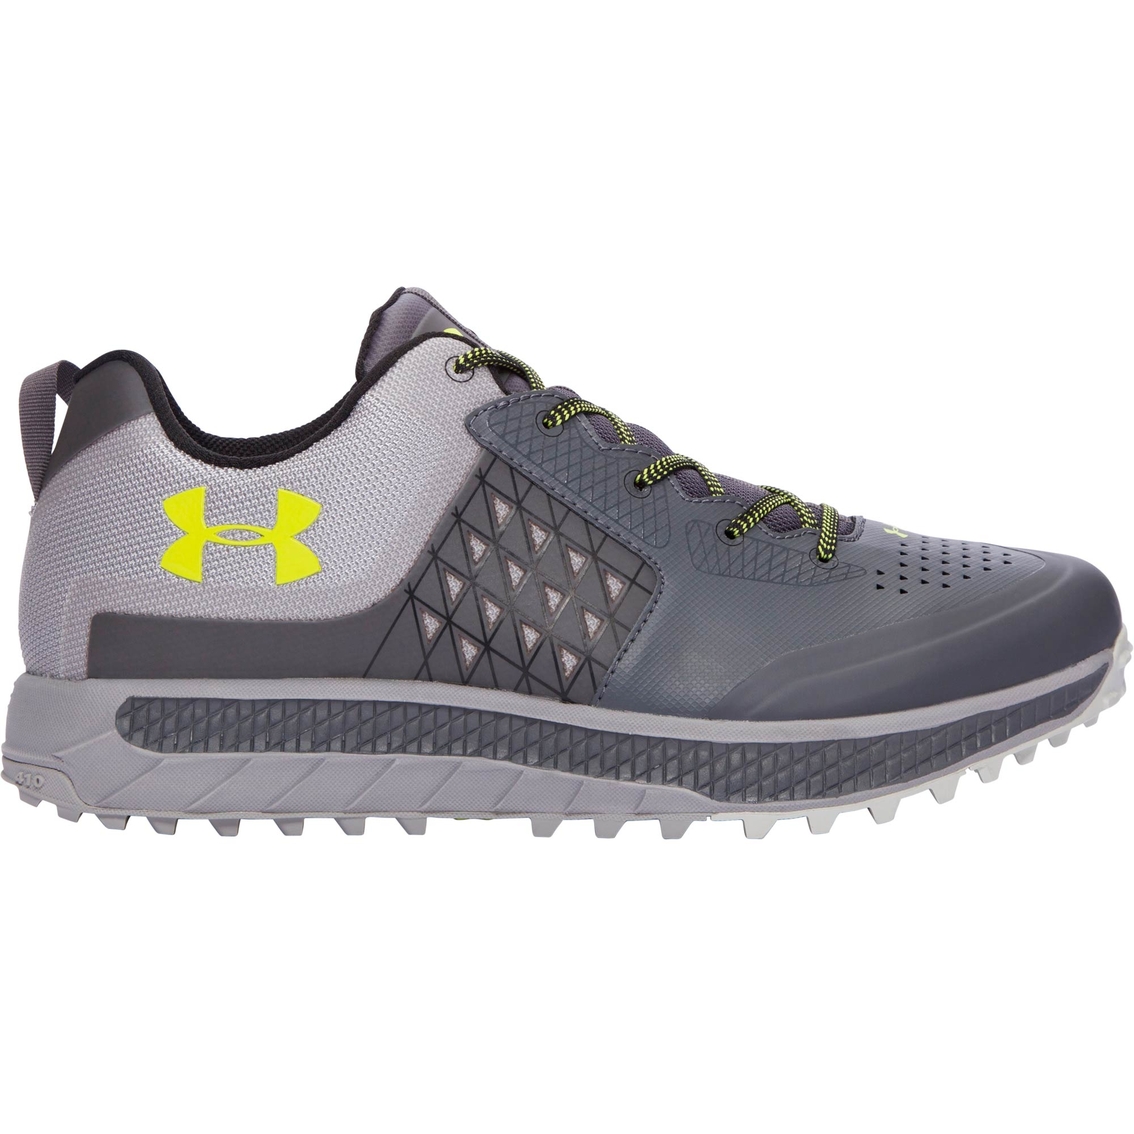 men's under armour trail running shoes